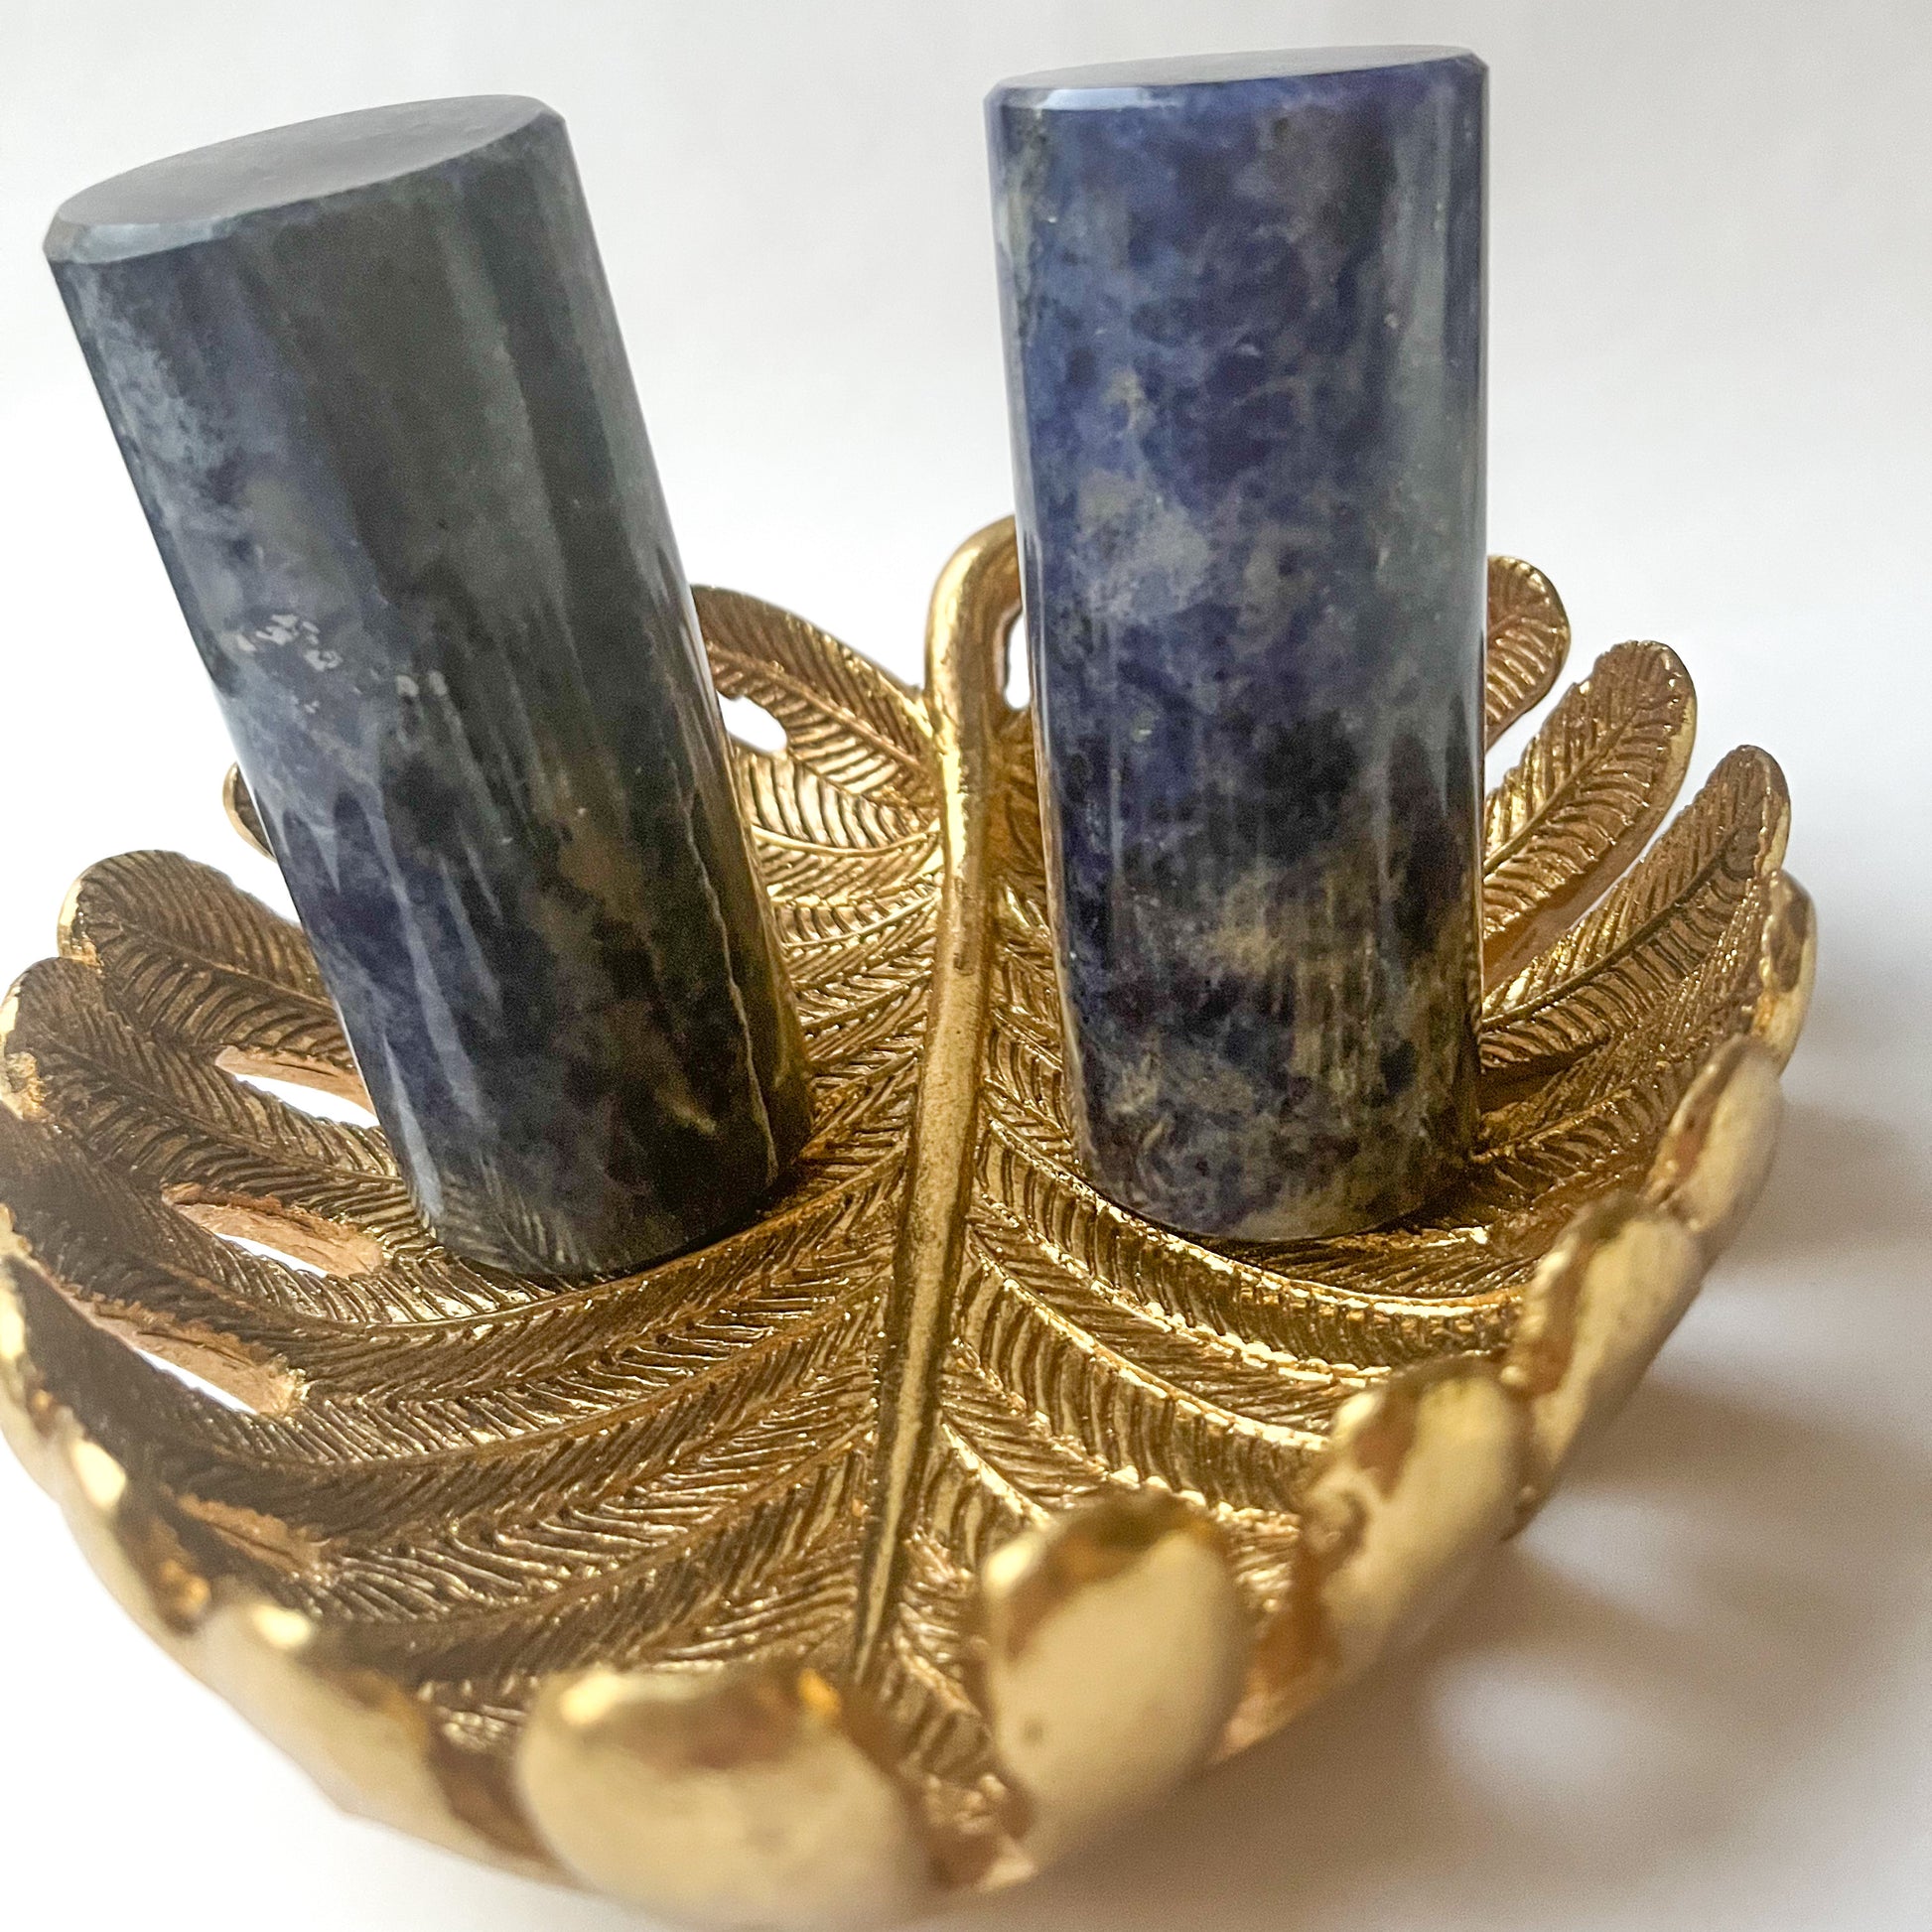 Polished Crystal Cylinders - Sodalite with Tourmaline Meditation Charger Pair